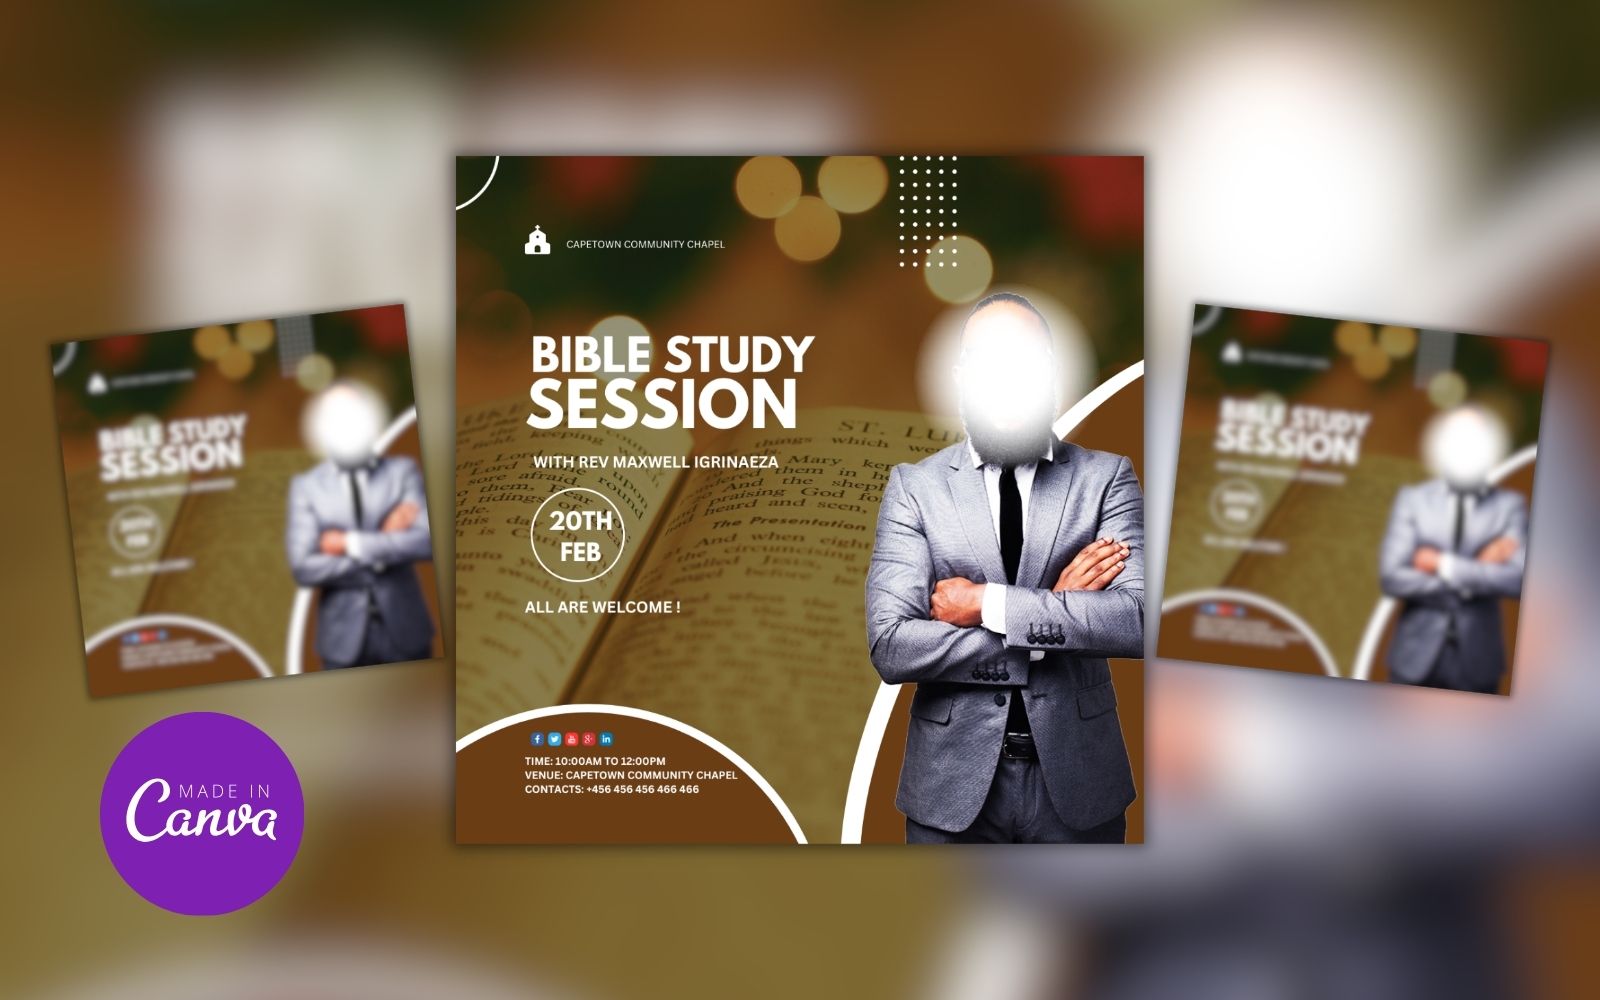 Bible Study Session Event Flyer Design Template